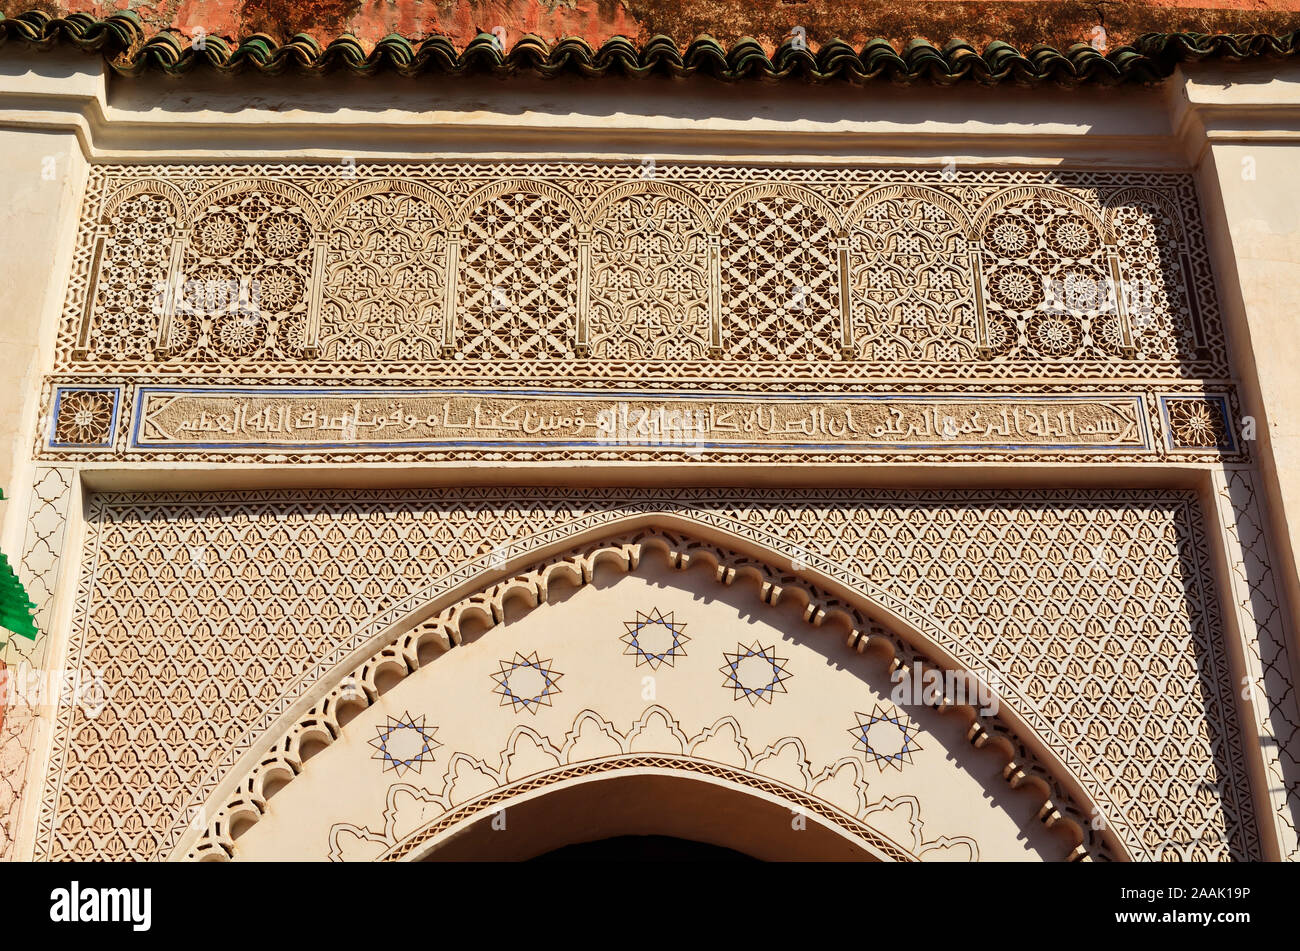 Amazing stucco work in a mosque inside the medina of Marrakech. Morocco Stock Photo